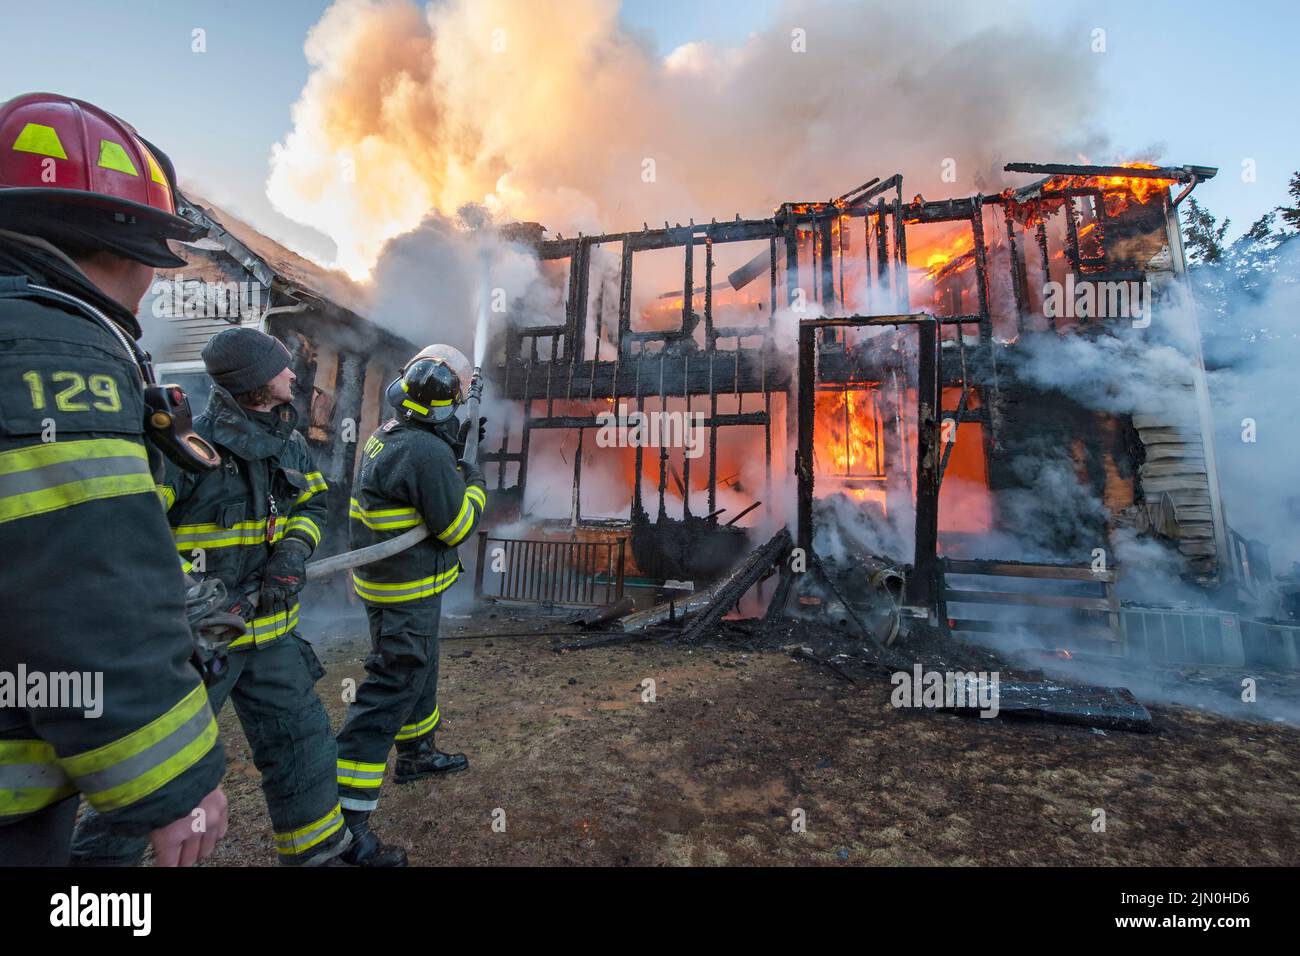 A team of three firefighters works to extinguish the fire as shortly before 6:00 a.m. on Saturday, March 8th, 2014 the Bridgehampton Fire Department w Stock Photo